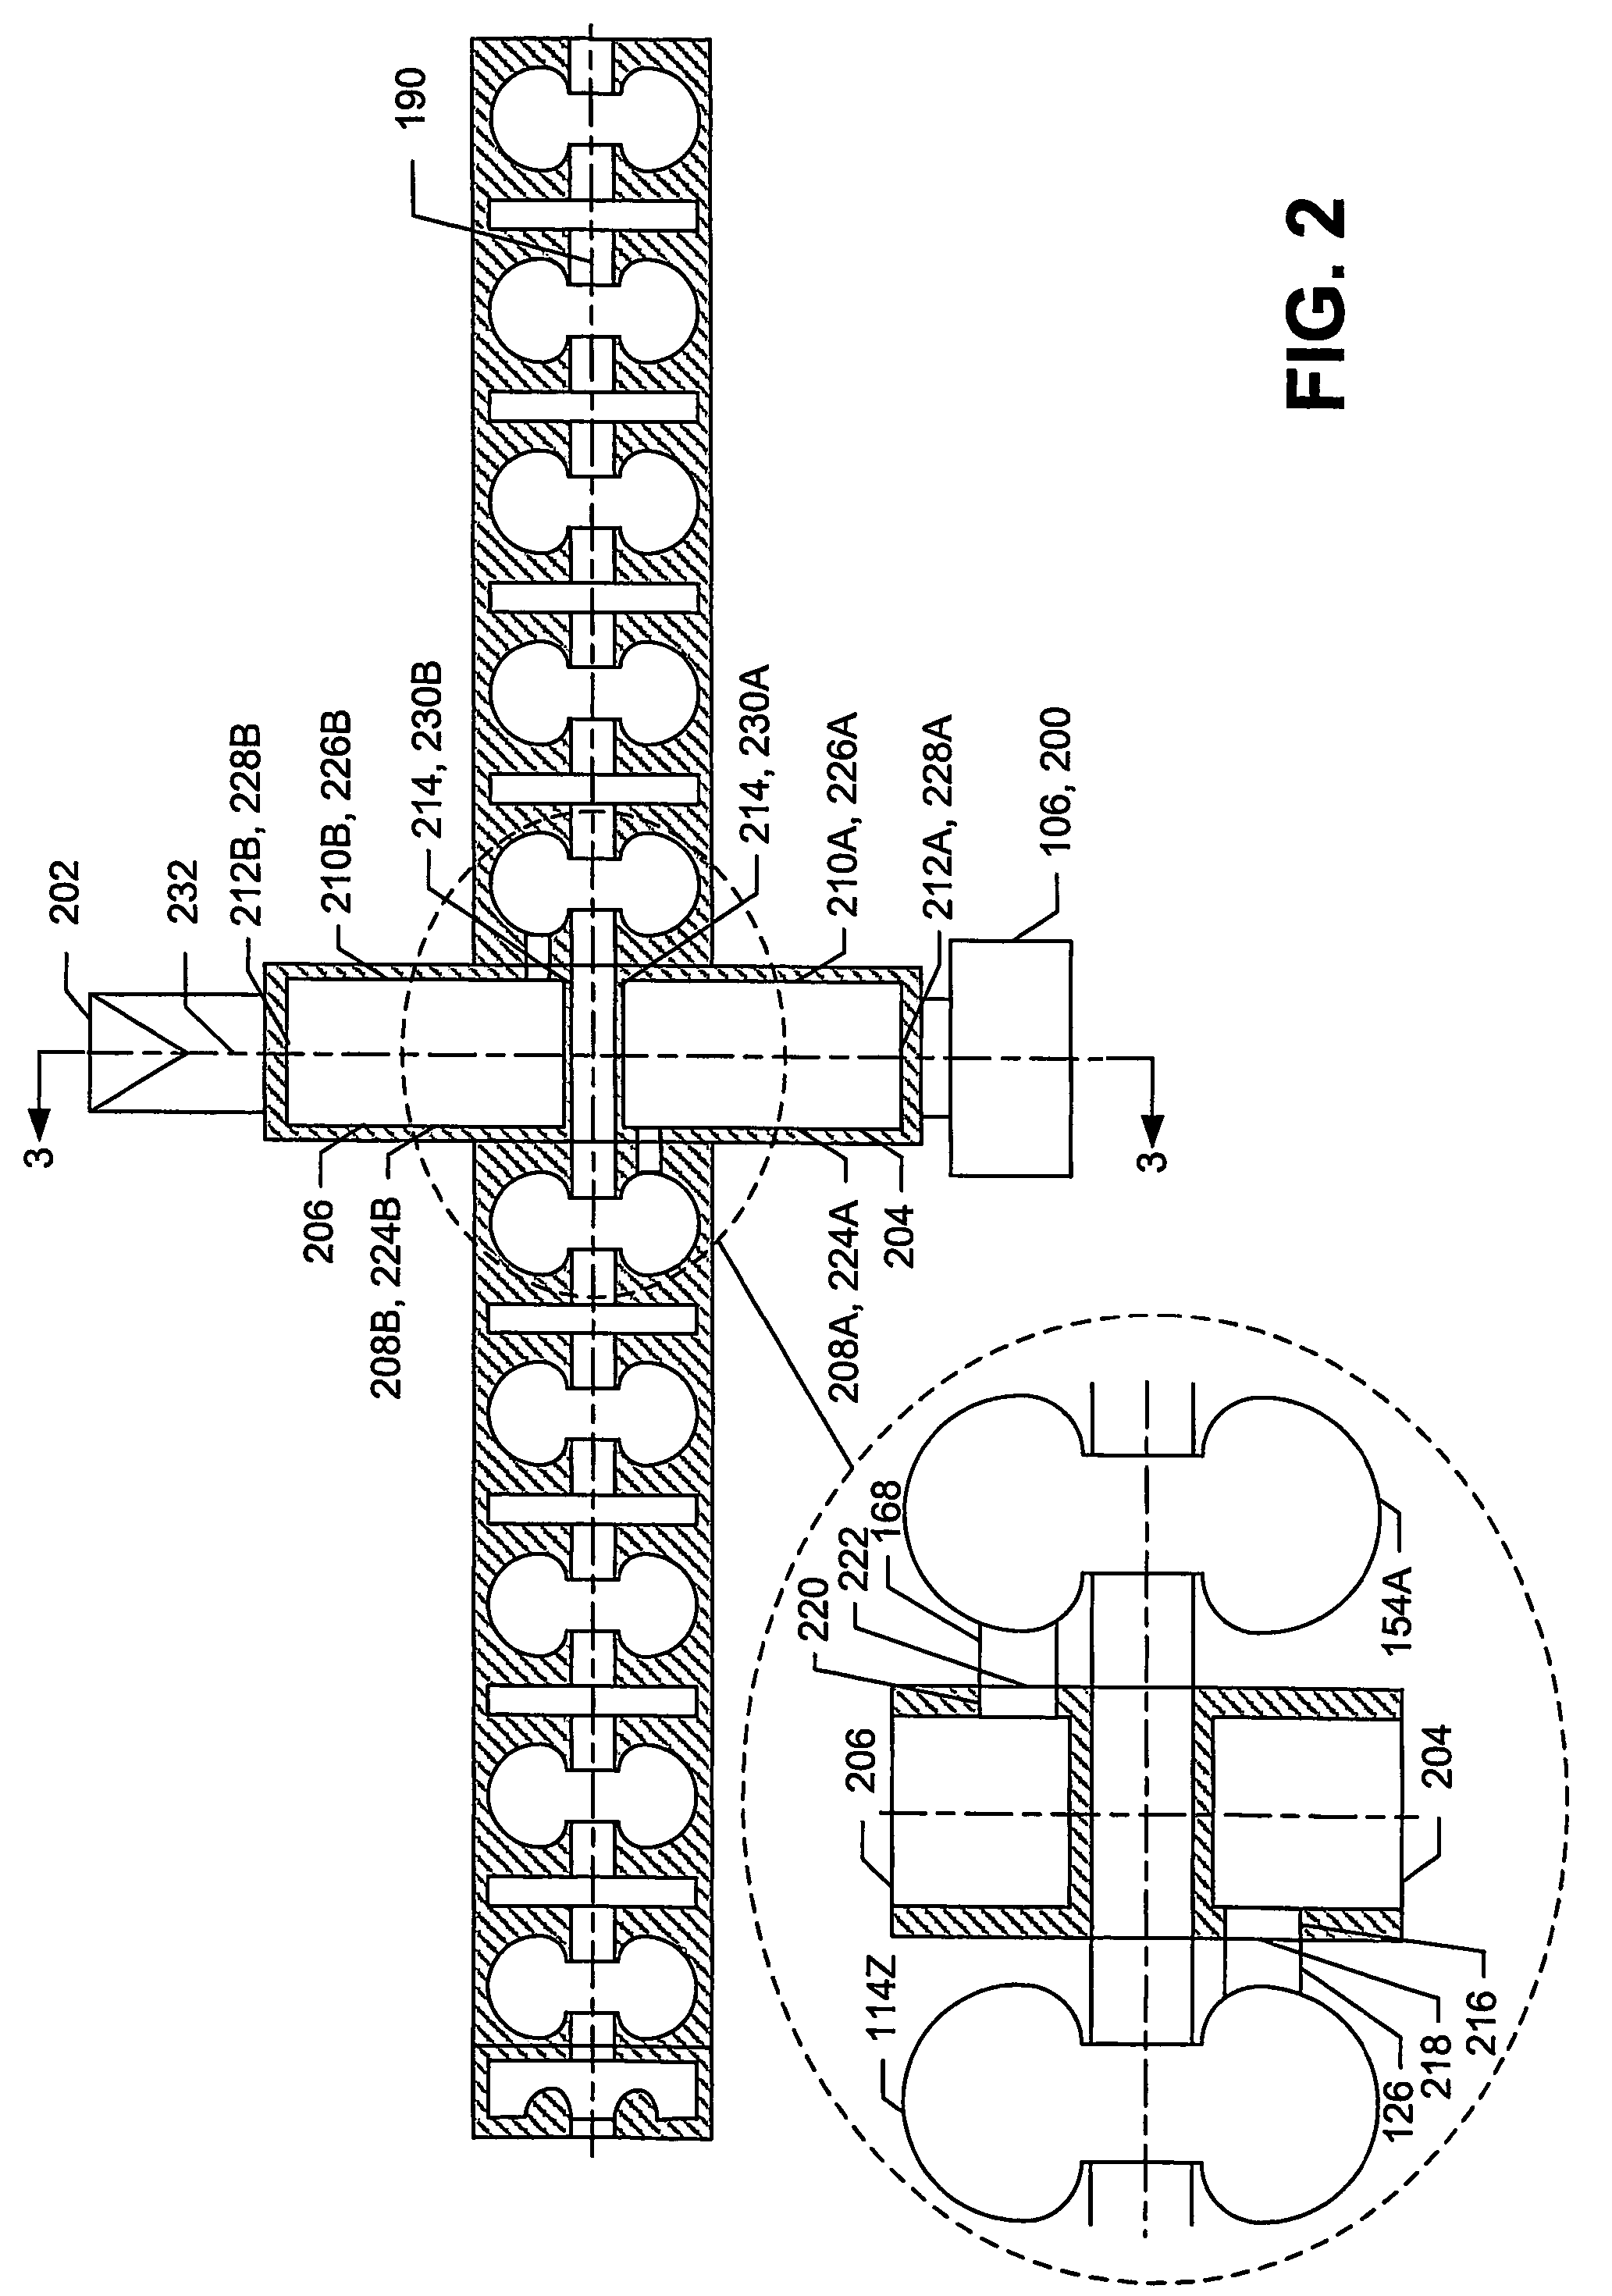 Multi-section particle accelerator with controlled beam current